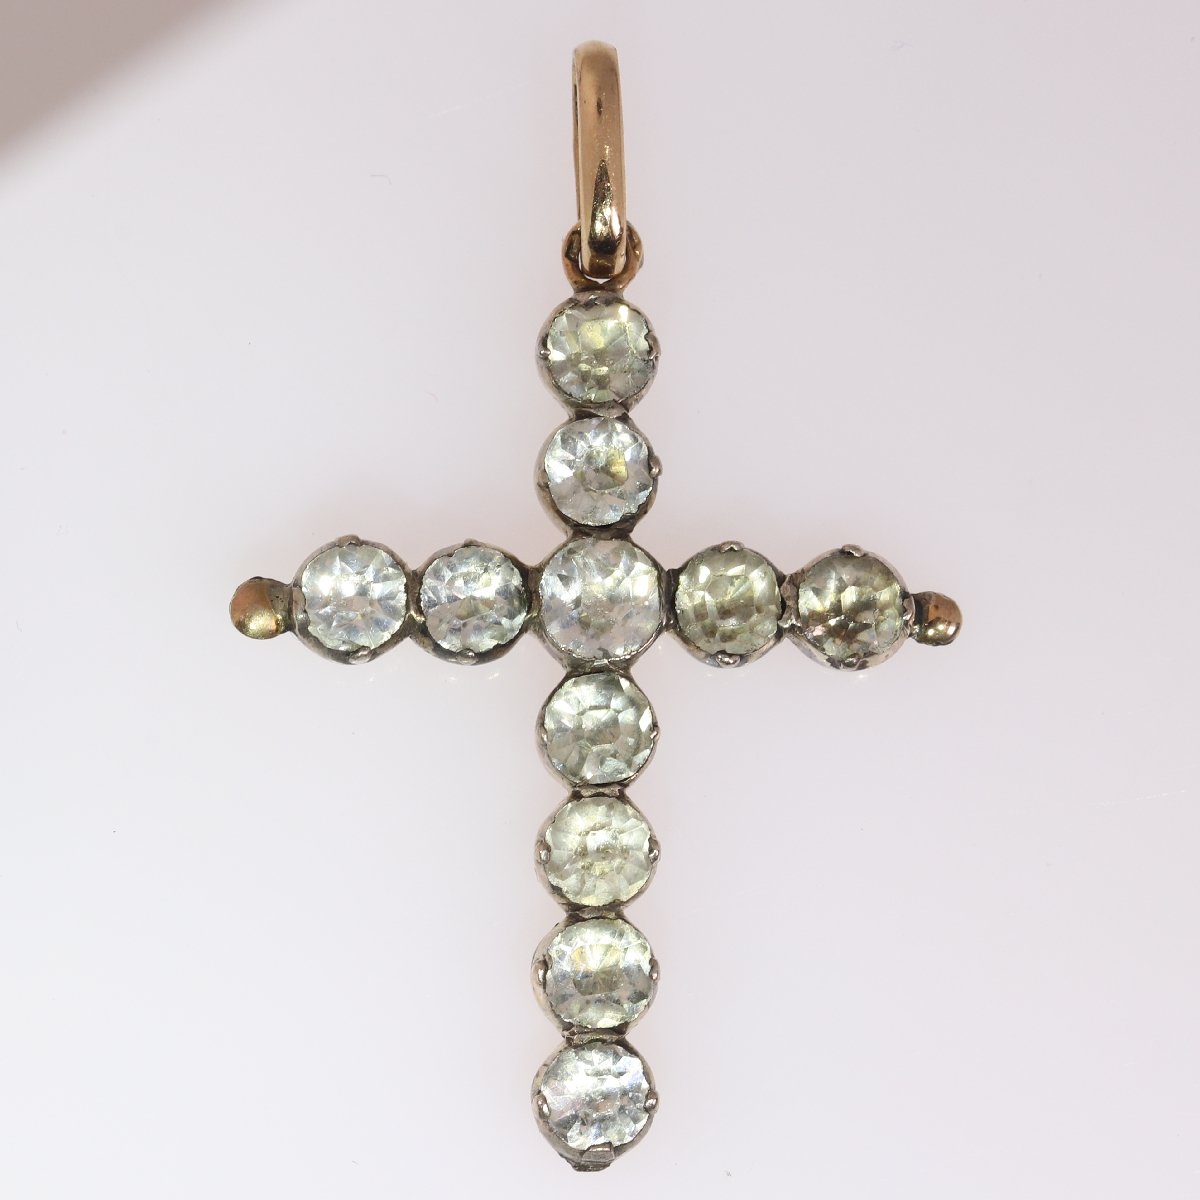 Victorian antique silver on gold cross